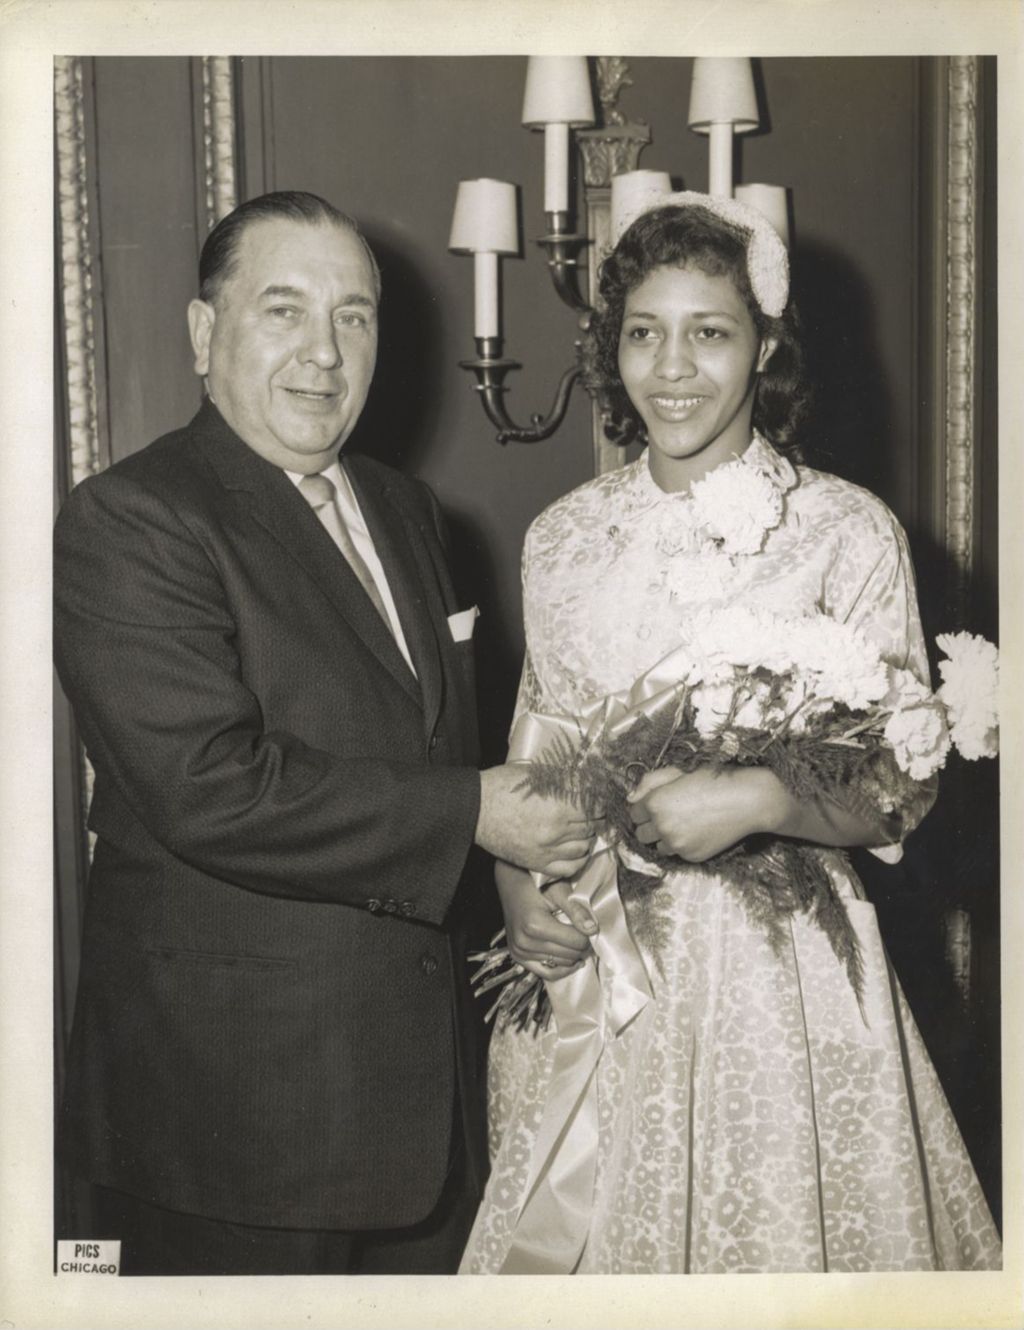 Miniature of Richard J. Daley presenting flowers to an African-American woman